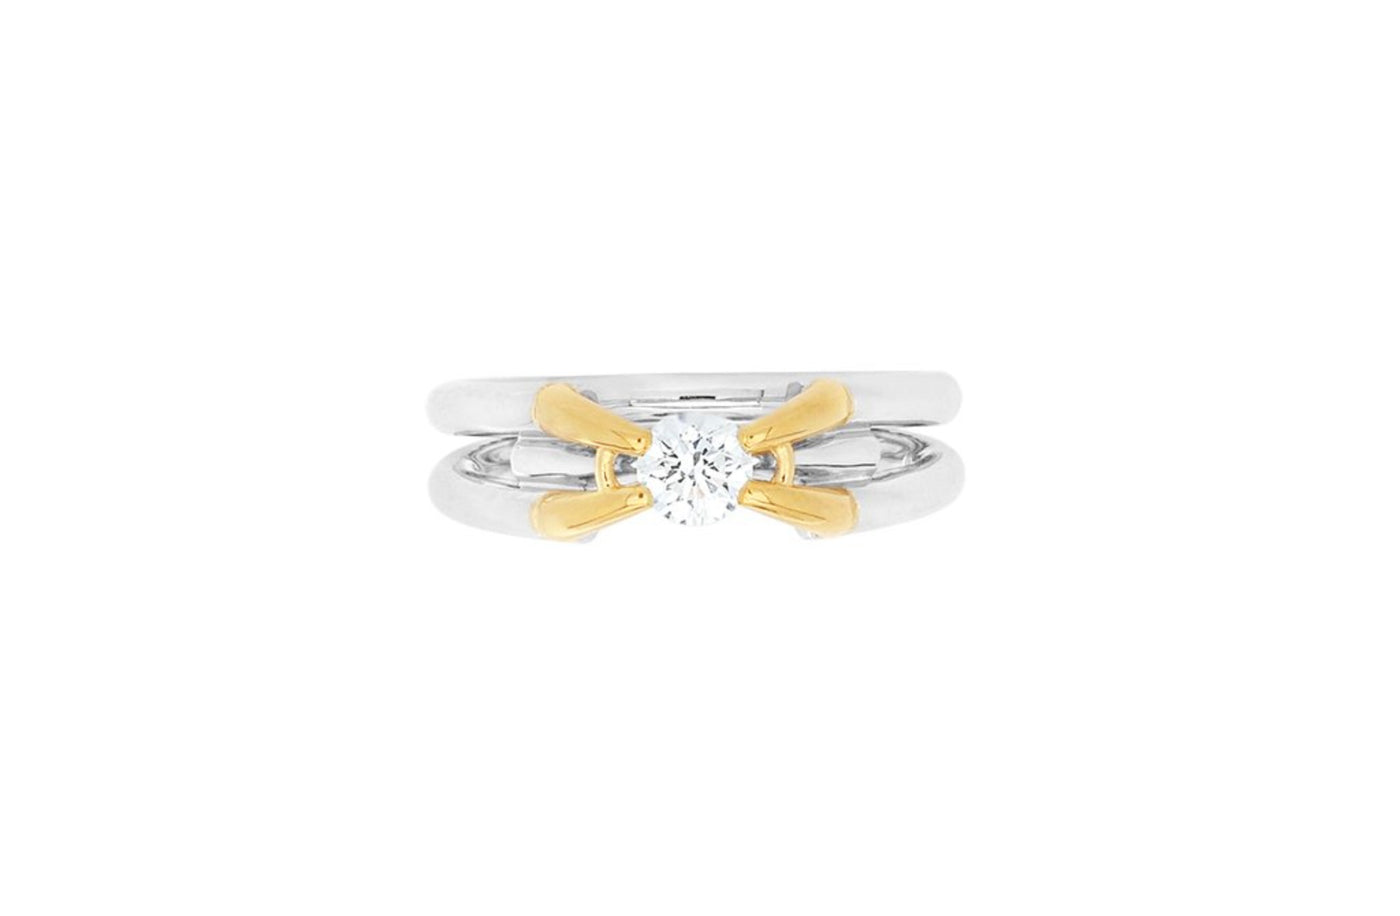 Inspired Collection, Tusk, Elephant, Platinum, 18k, 18ct, White gold yellow gold, brilliant cut, round cut, specialist, contemporary, modern, jewellery, jewelry, engagement ring, ring design, inspired design, tension setting 